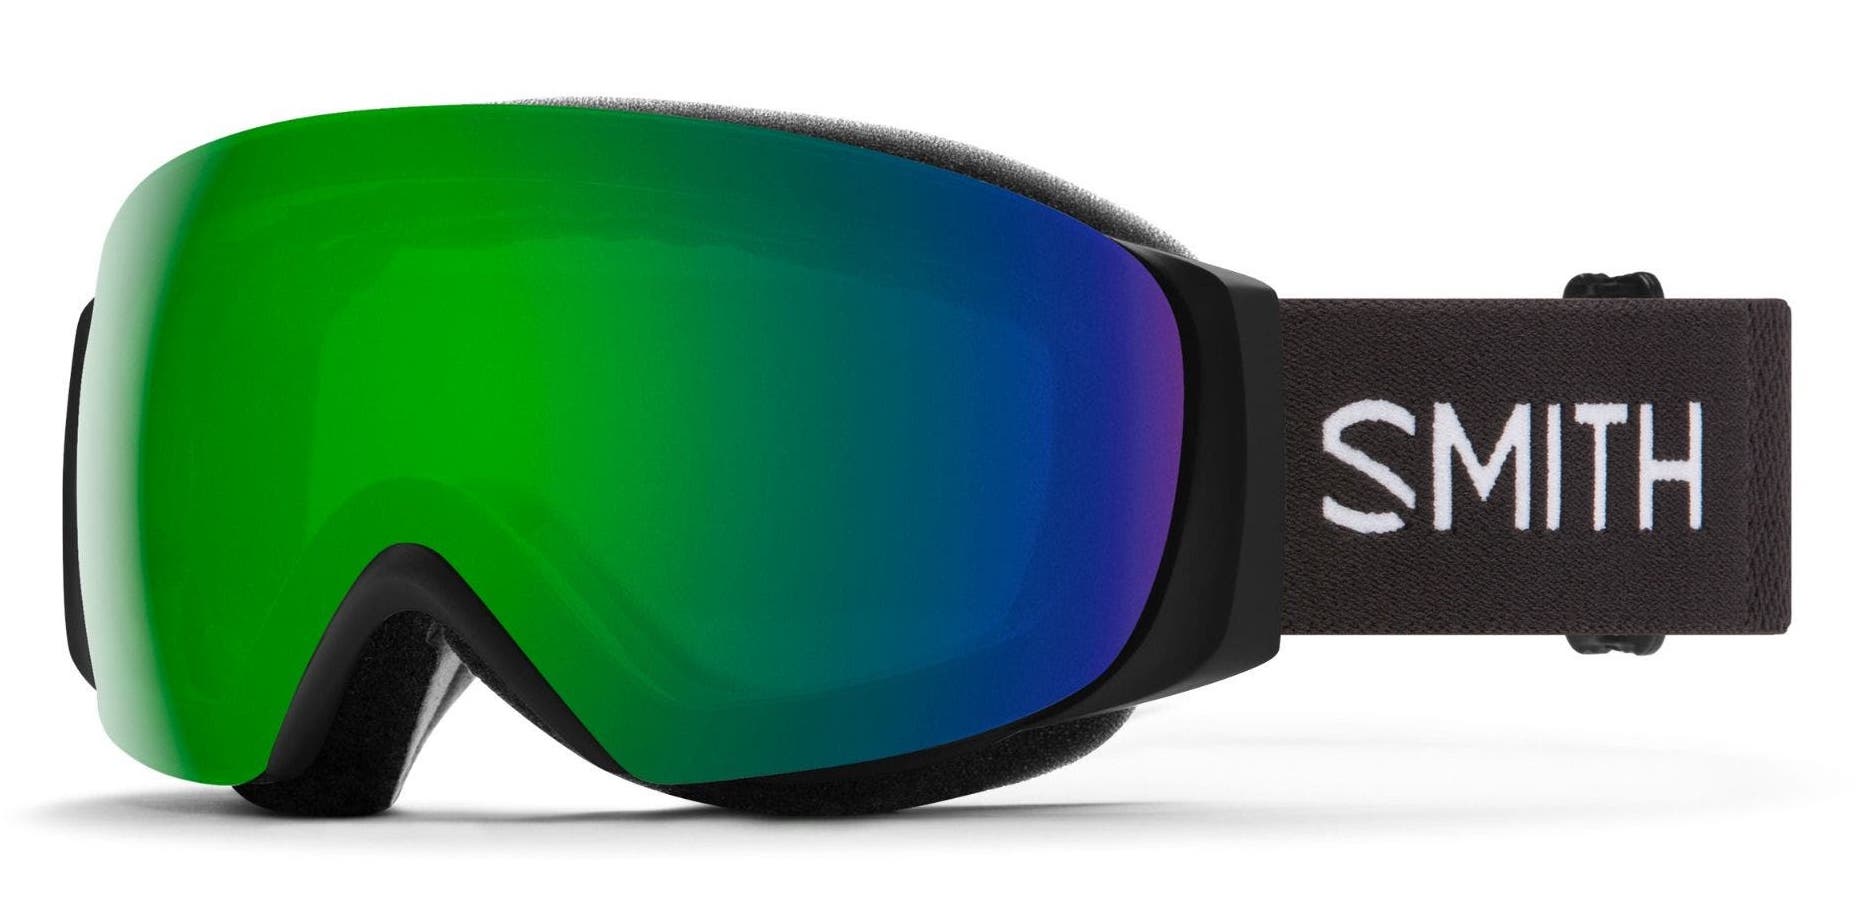 SMITH I/O MAG S small goggles for skiing and snowboarding. Black strap with white SMITH text and a green blue mirror shield lens.